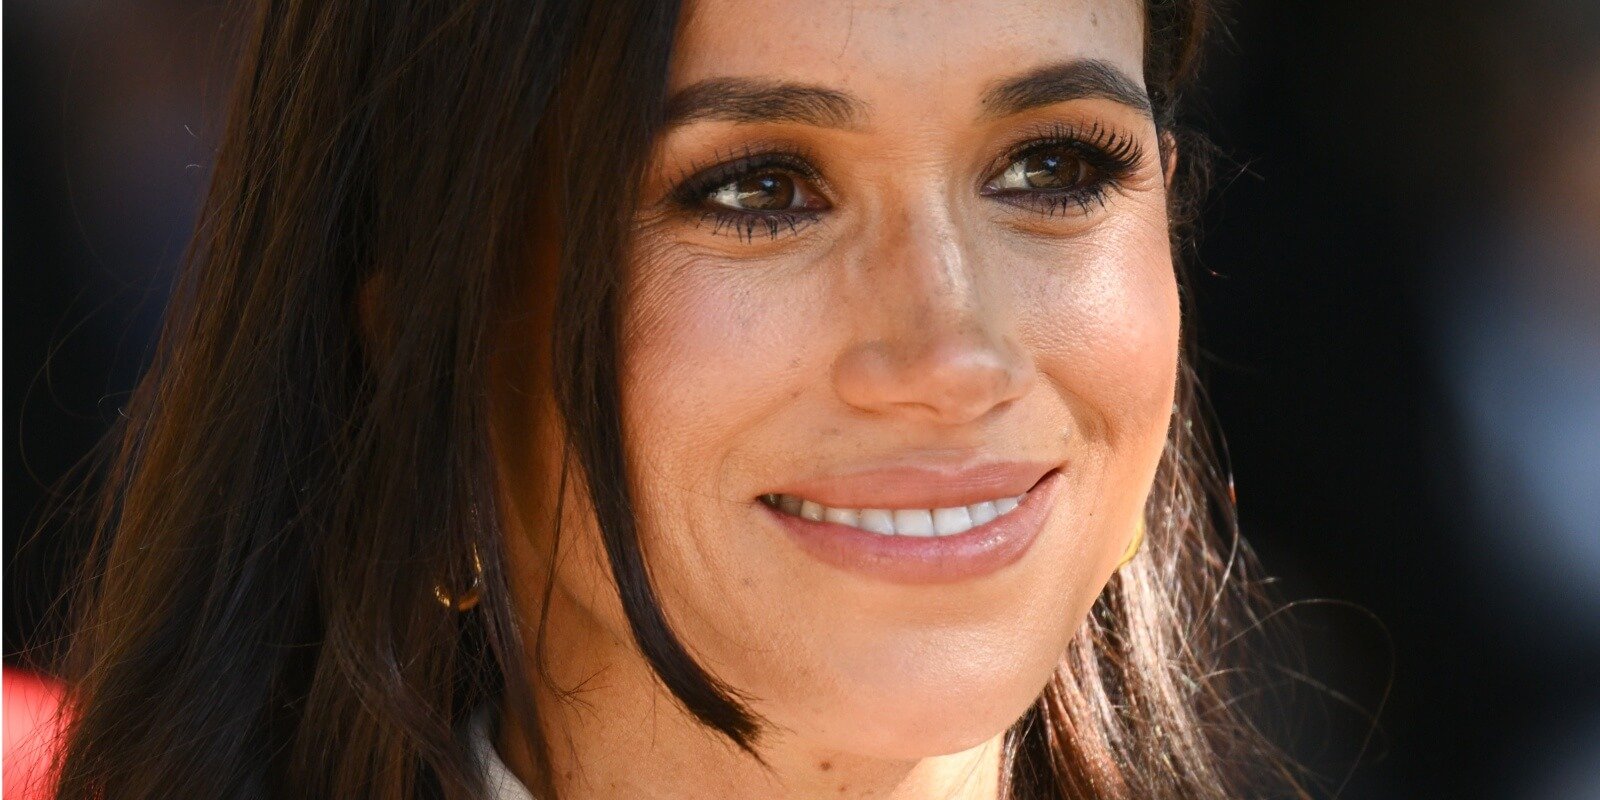 Meghan Markle poses for a photograph taken at the 2023 Invictus Games.